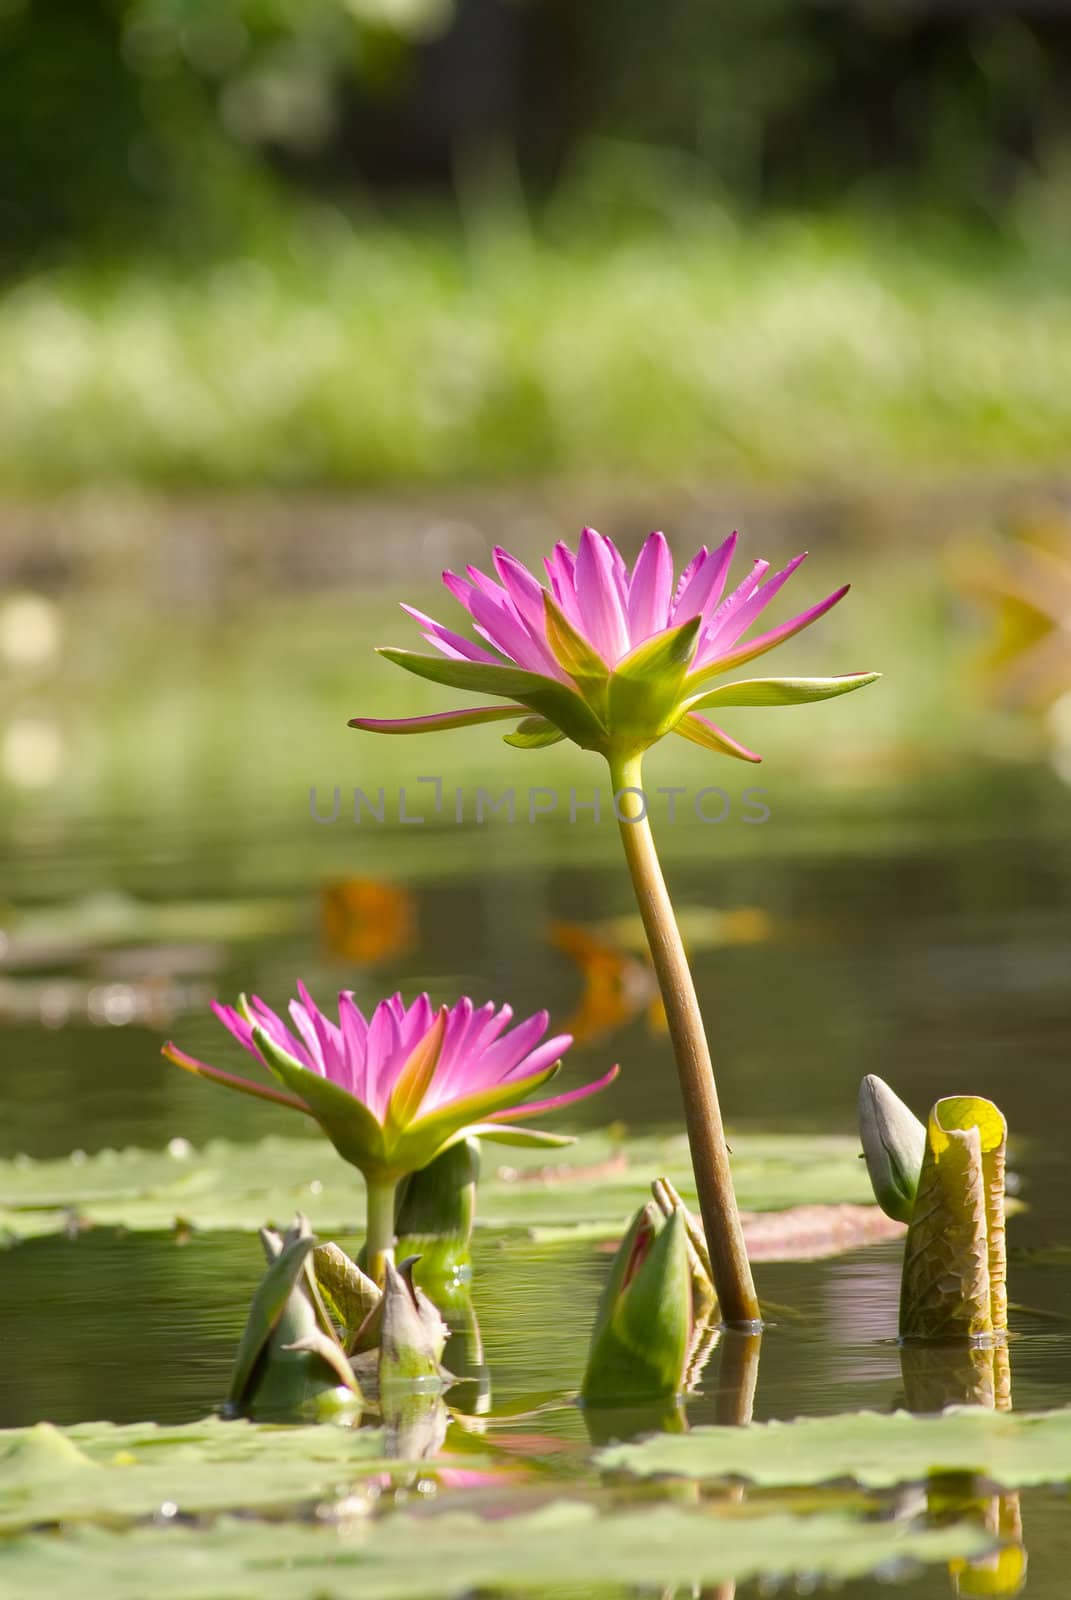 Here are two beautiful lotus on the water.